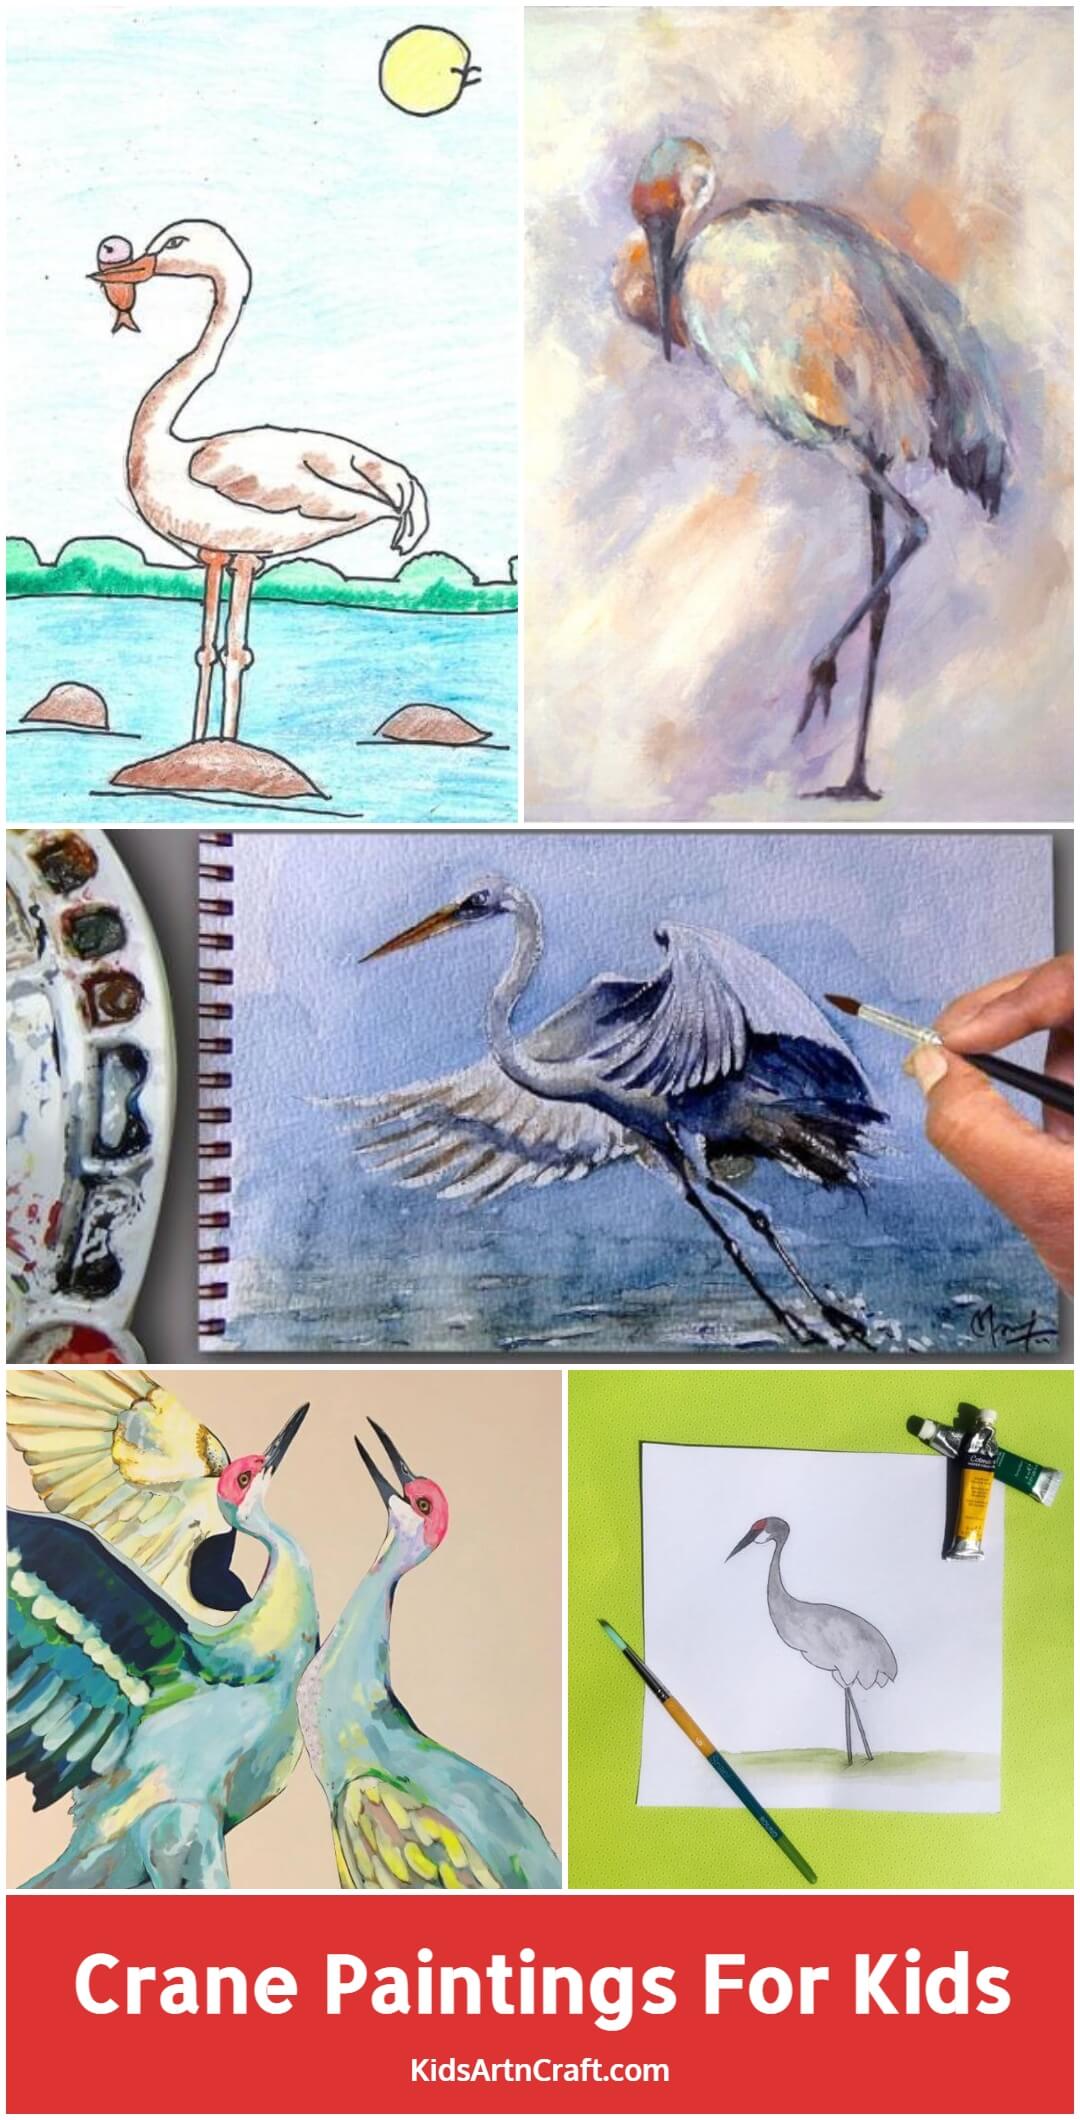 Crane Paintings For Kids